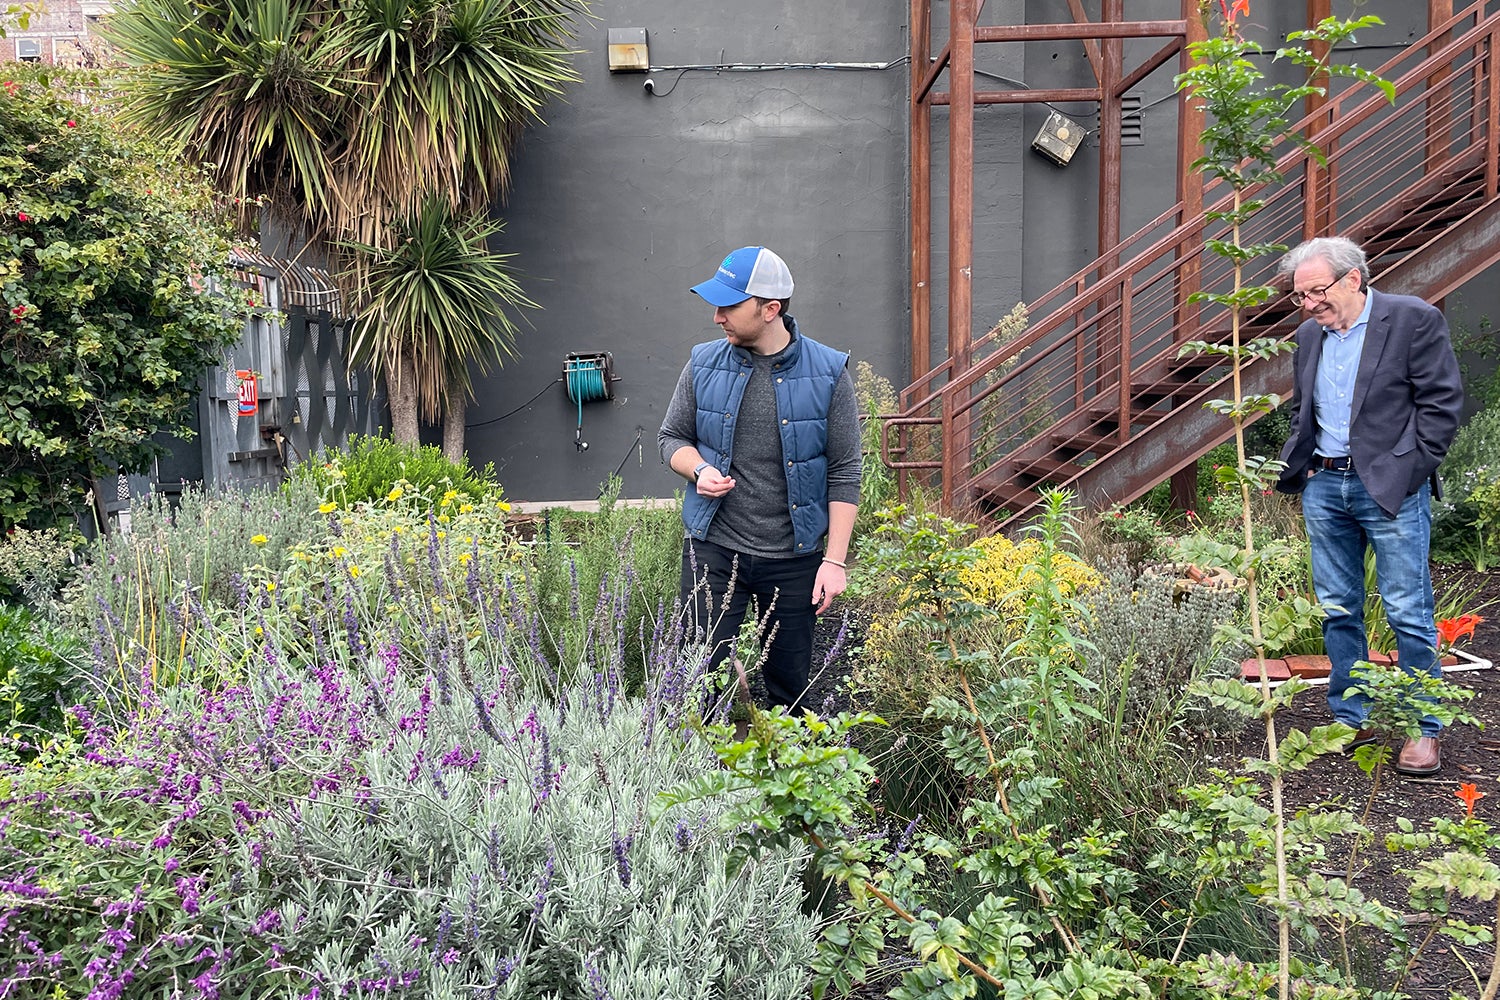 Two men in blue suits walking through a green and purple city garden grown with human manure